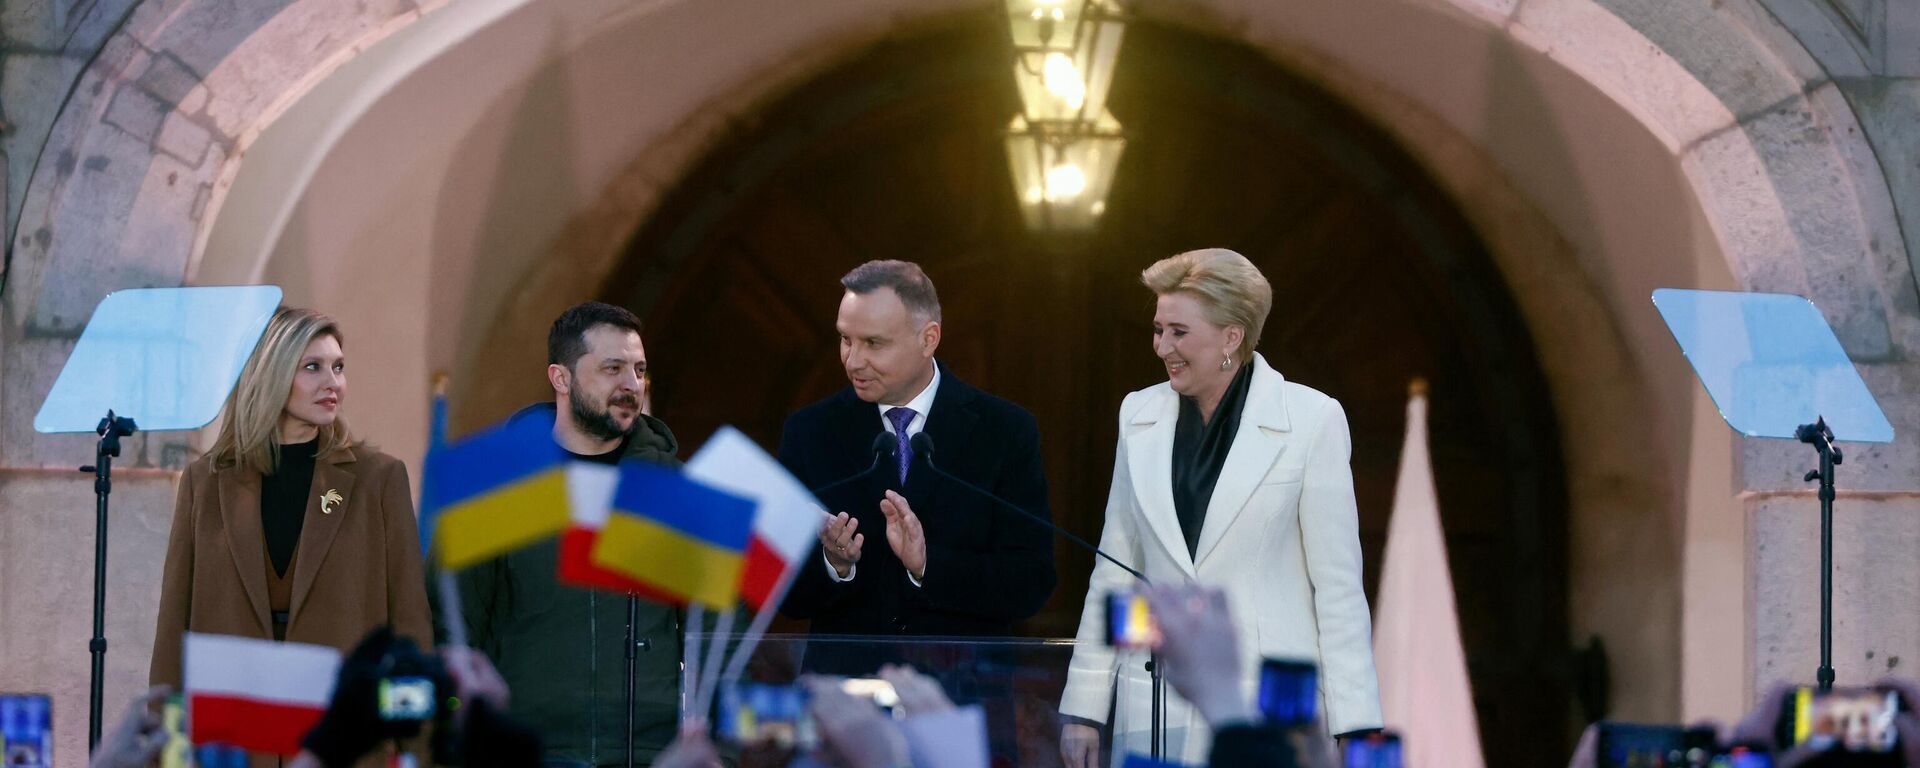 Polish President Andrzej Duda (2nd R) and his wife Agata (R) wave to wellwishers alongside Ukrainian President Volodymyr Zelensky (2nd L) and his wife Olena (L) in the courtyard of the Royal Castle in Warsaw, Poland, on April 5, 2023. - Sputnik International, 1920, 02.10.2023